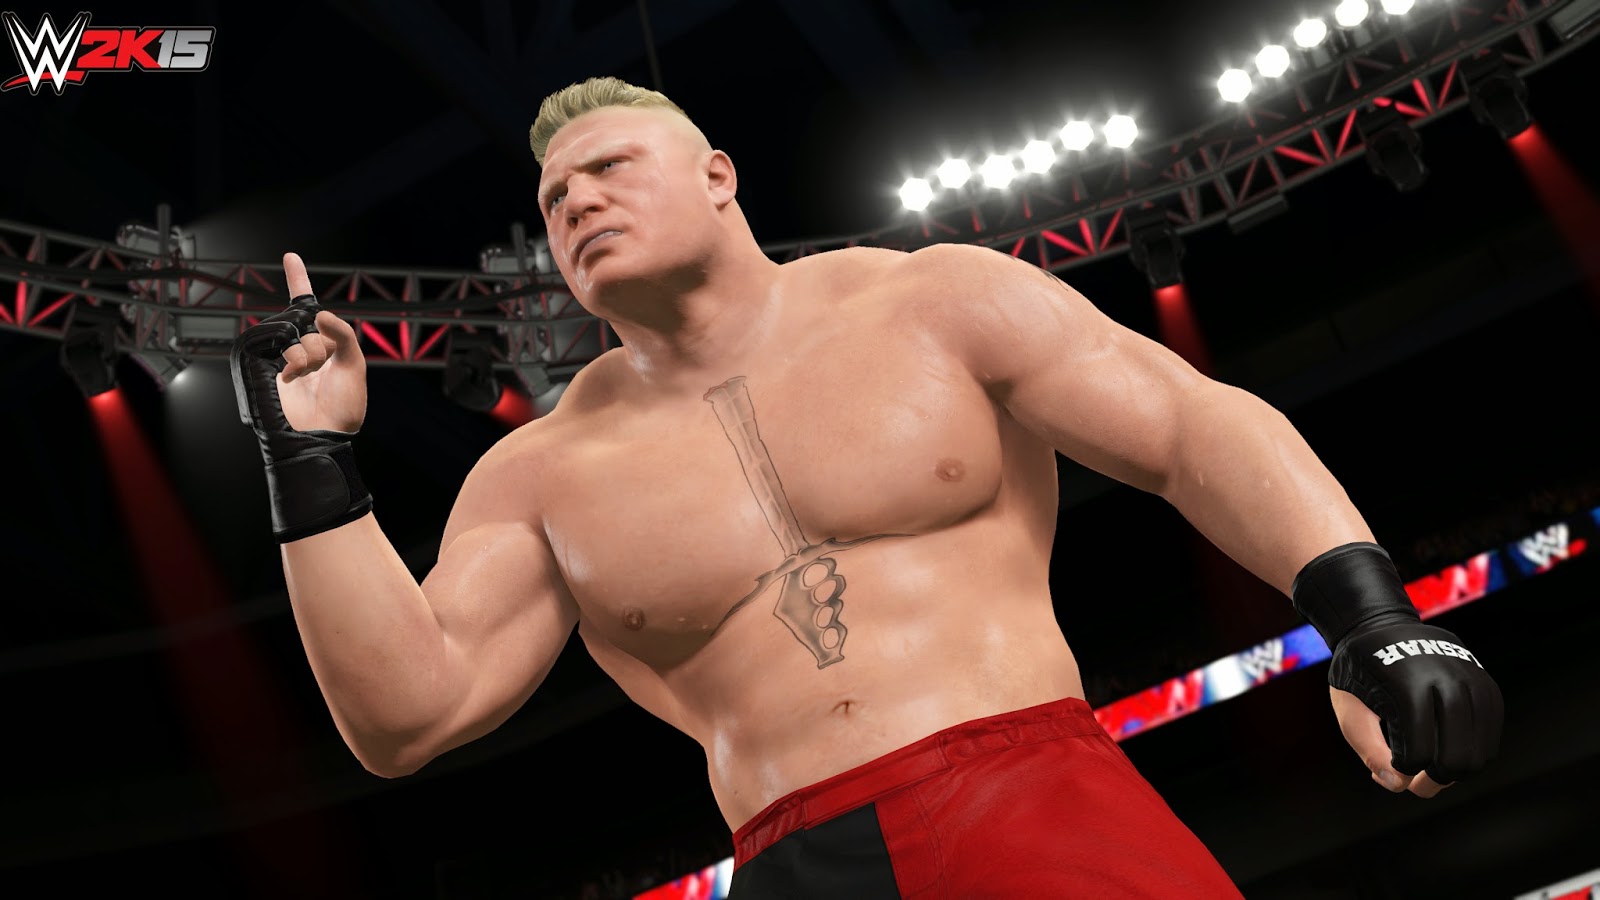 WWE 2K15 PC Game Free Download (2018 Edition) - Blu Networks